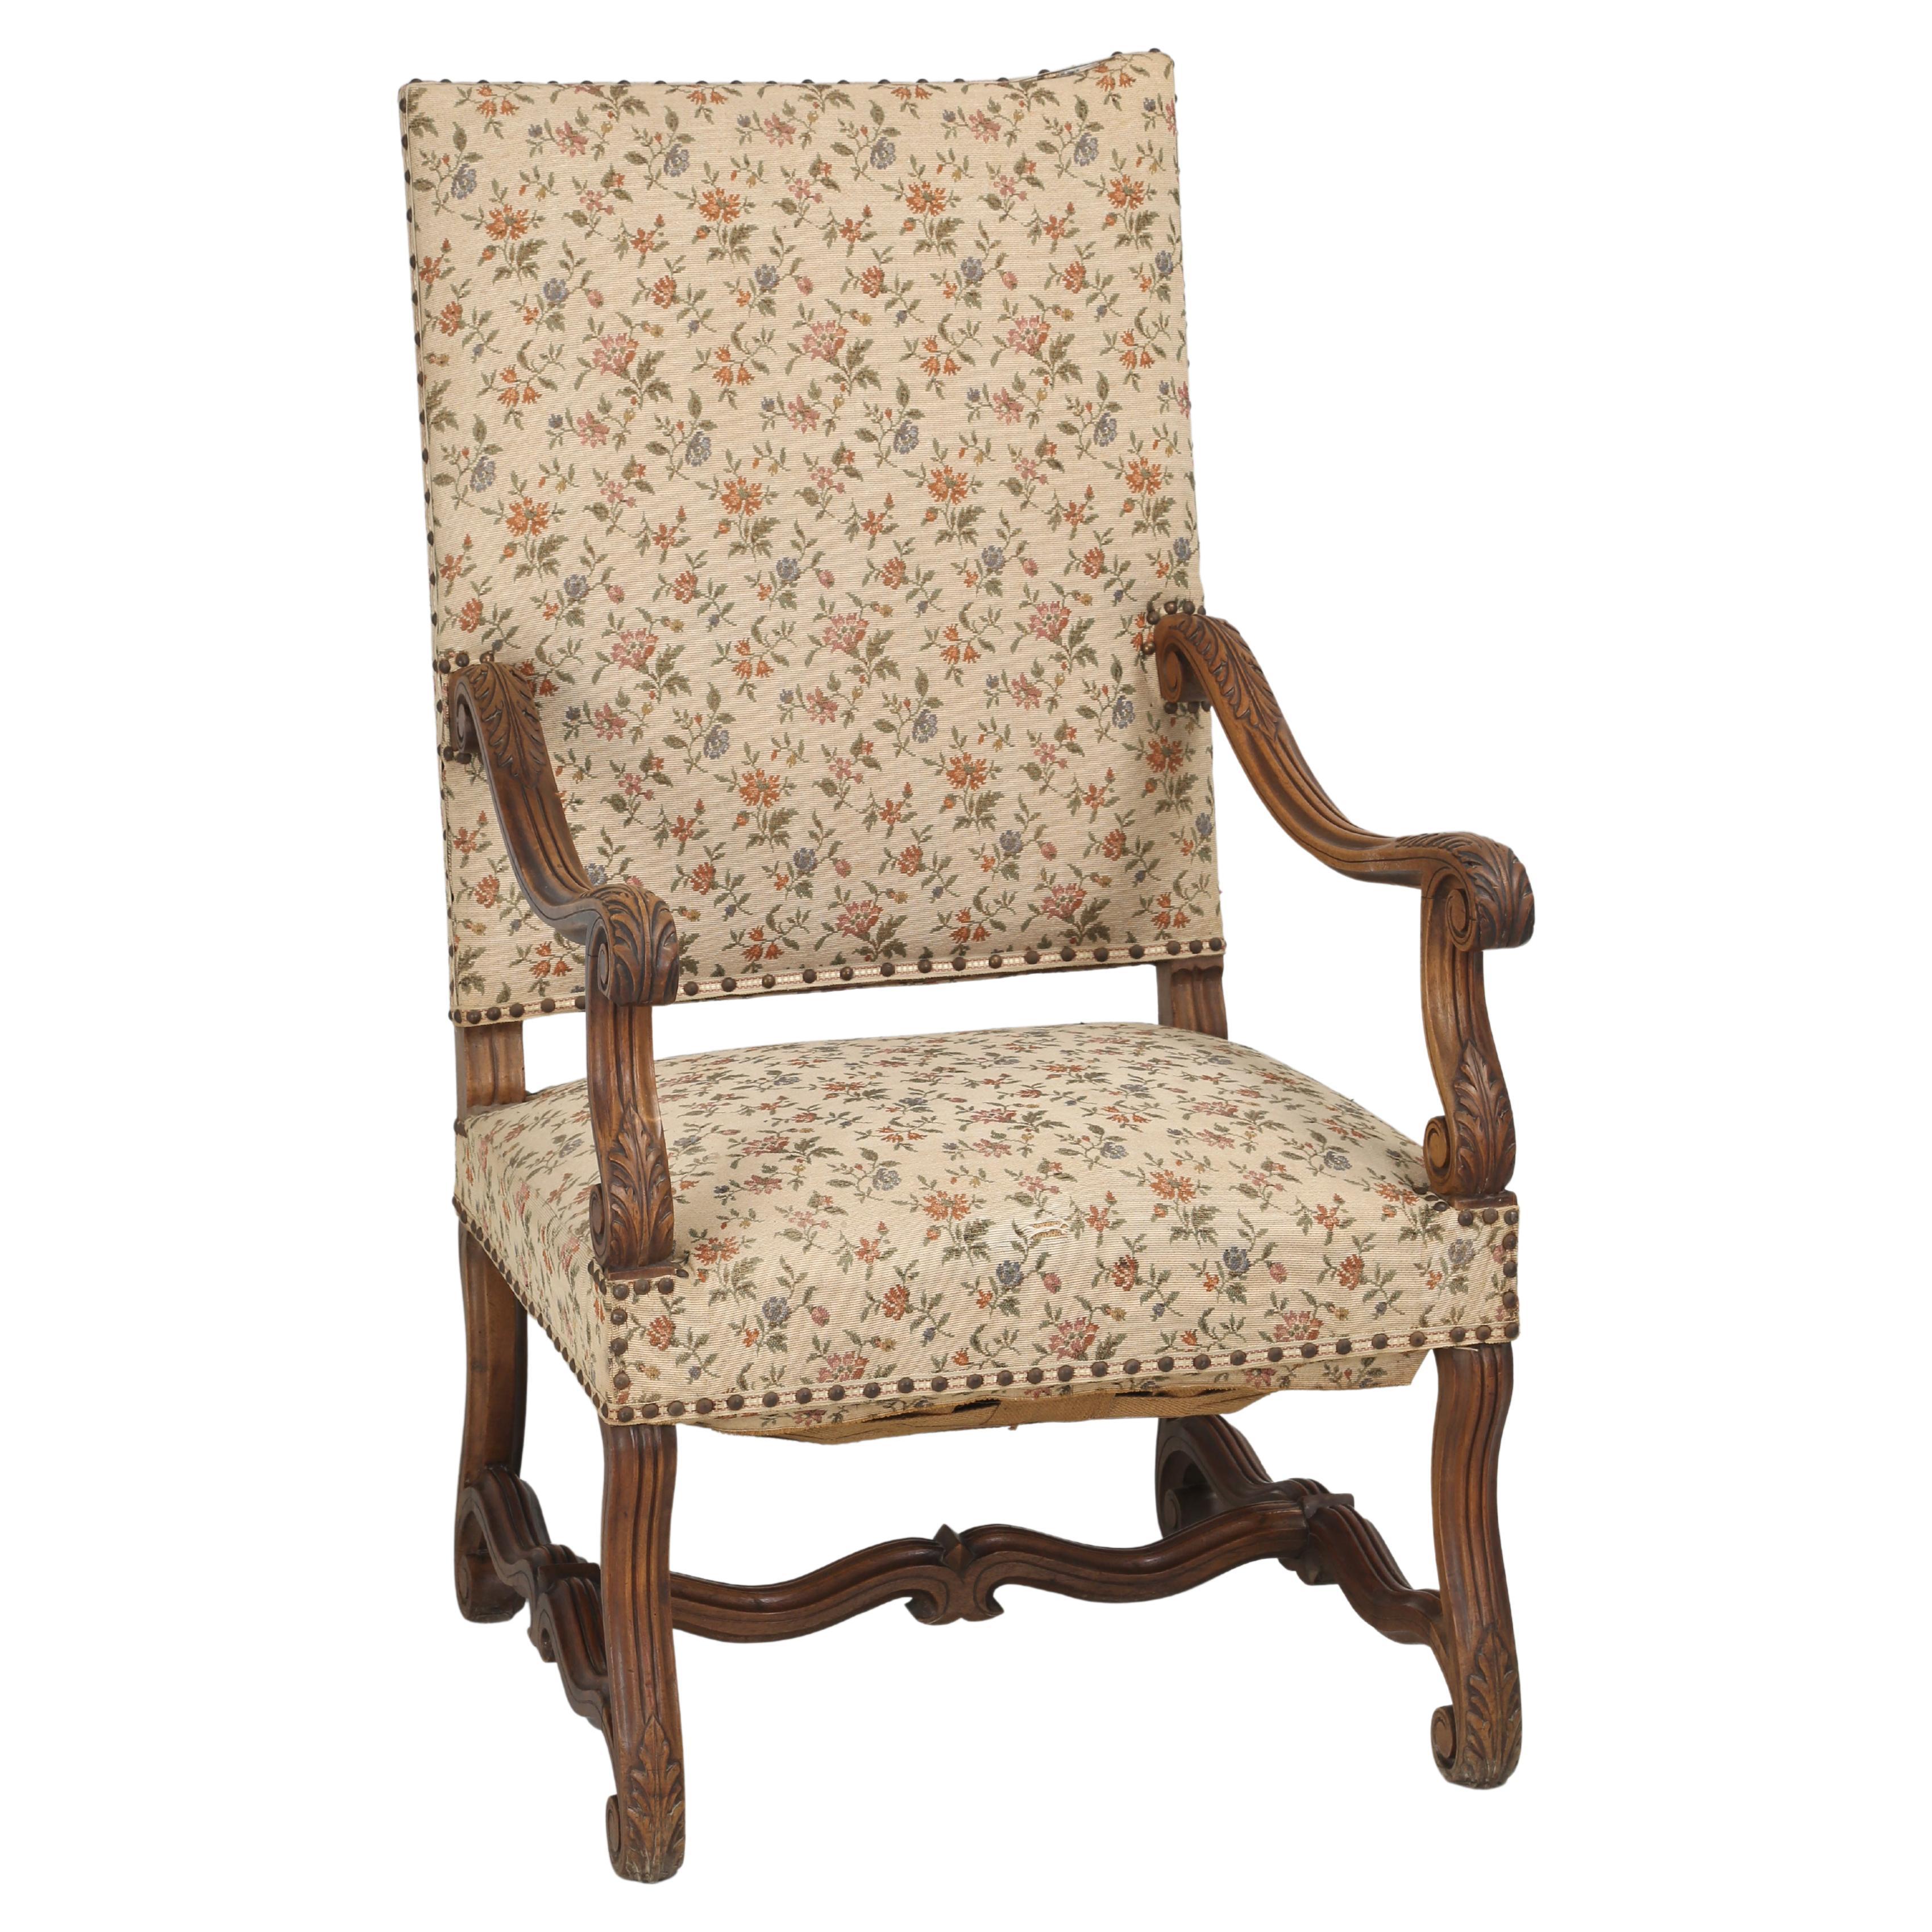 Antique French Walnut Hand Carved Armchair or Throne Chair Unrestored Condition For Sale